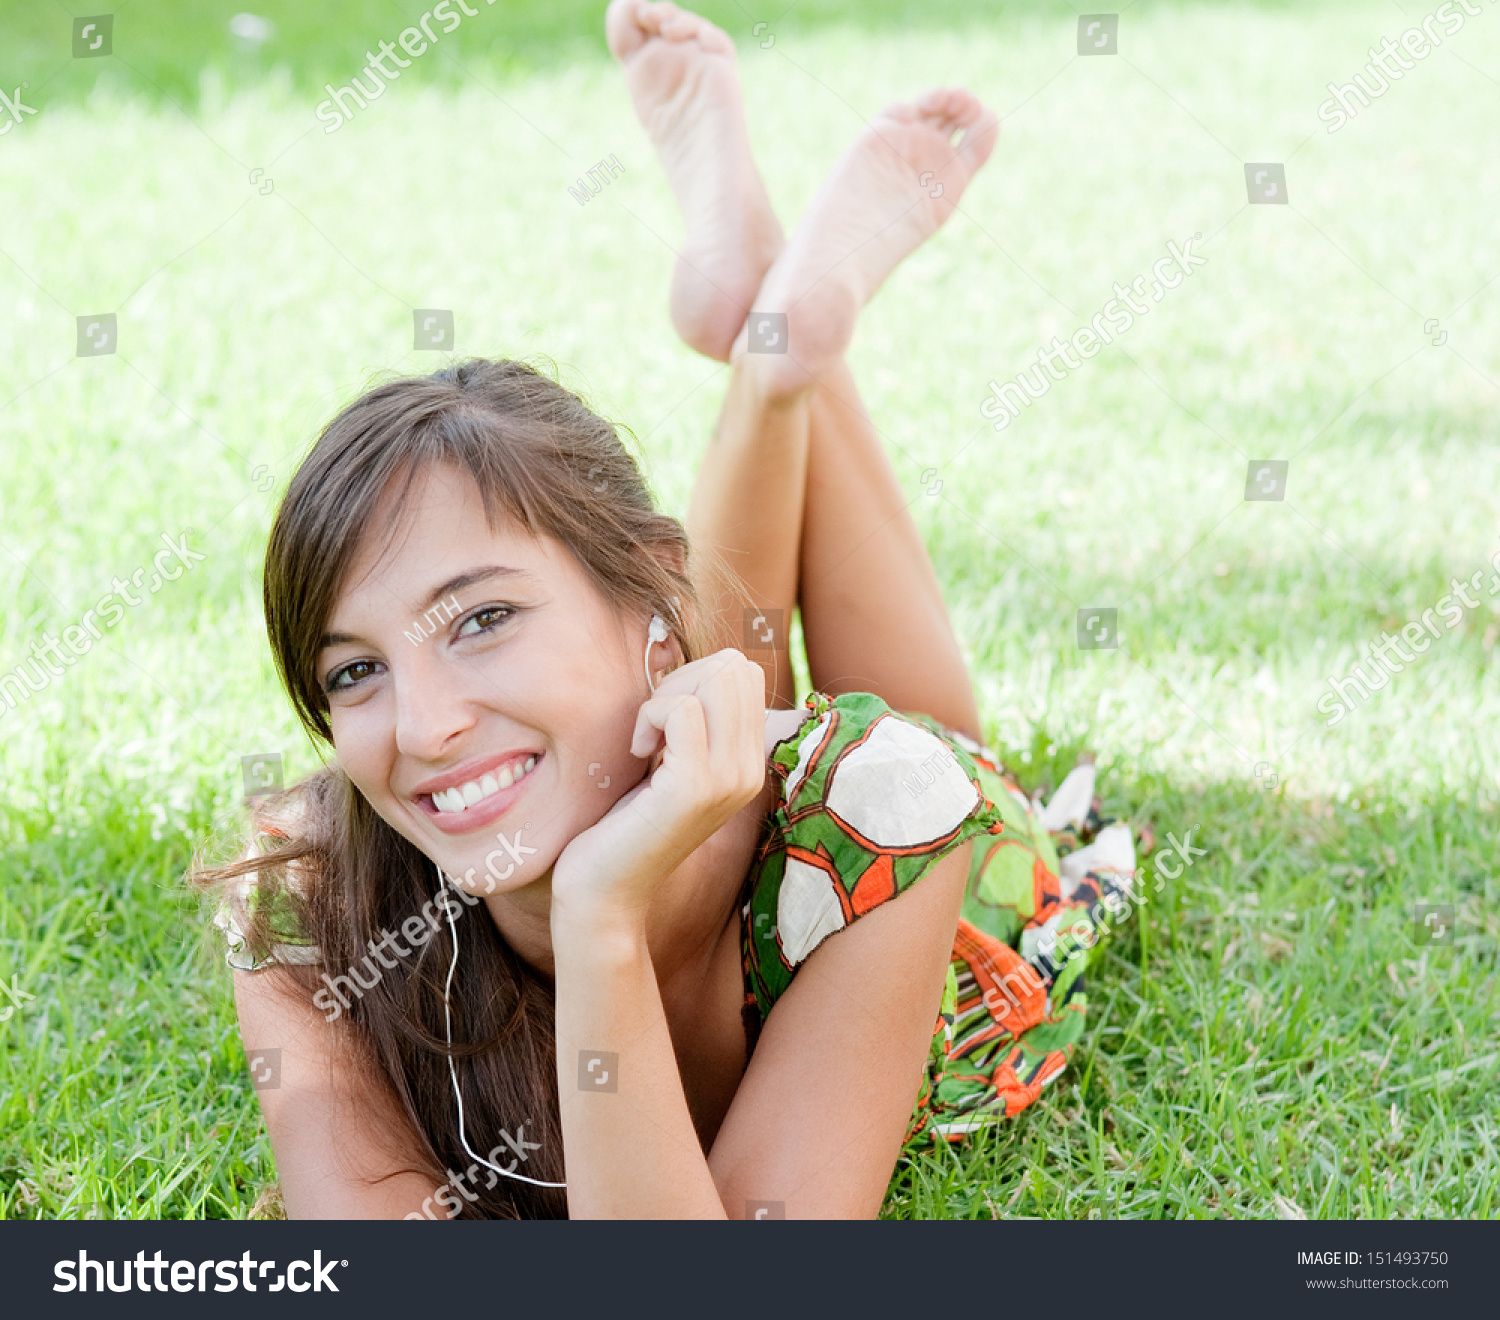 Attractive Young Woman Laying Down On Fresh Green Grass In A Park With Her Feet Up And Listening